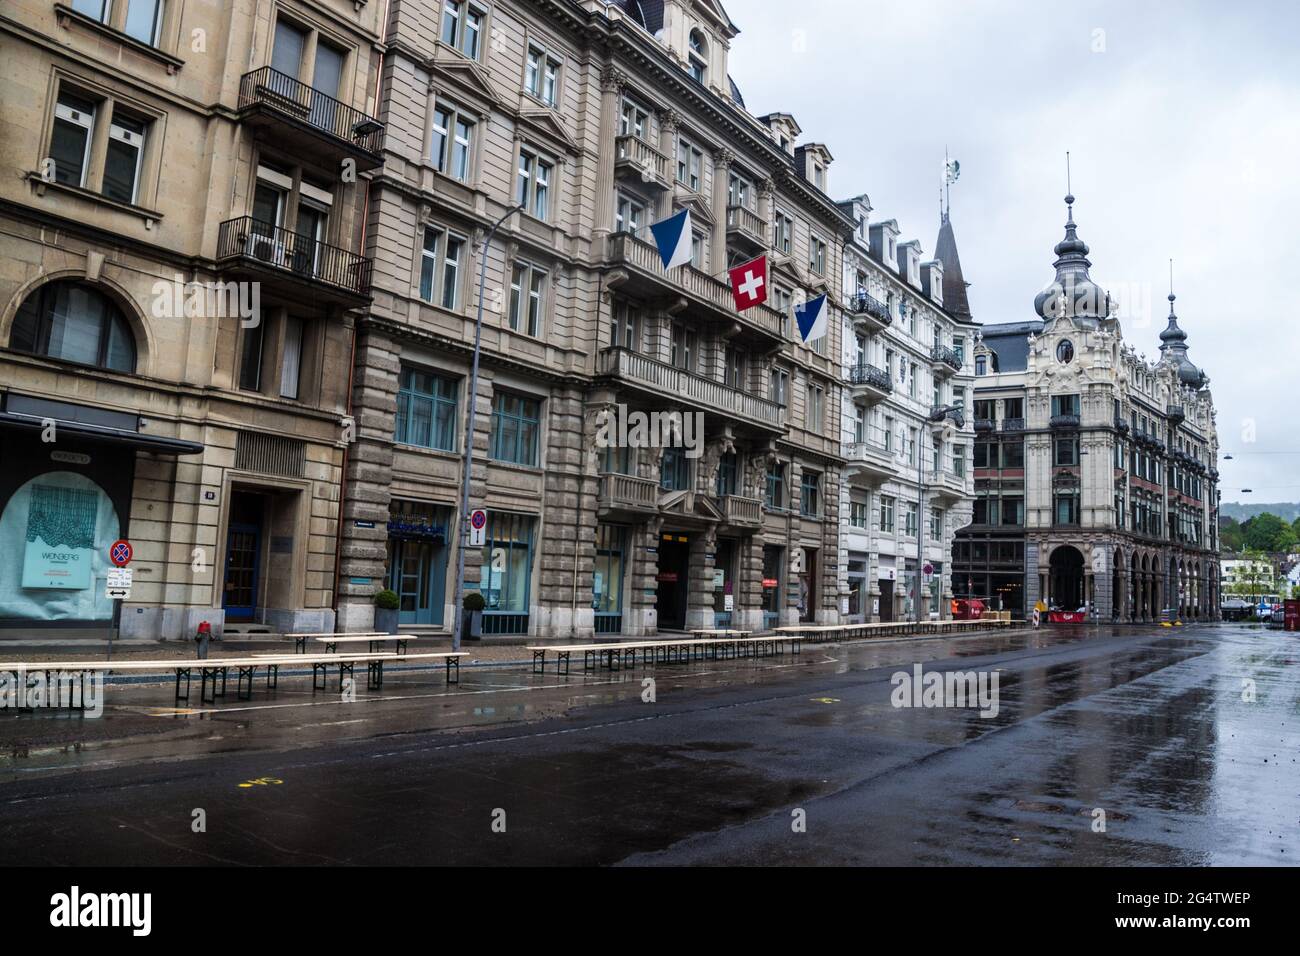 ZURICH - APRIL 28: View of a street Bahnhofstrasse on April 28, 2014 in Zurich, Switzerland. Zurich is the largest city in Switzerland and the capital Stock Photo